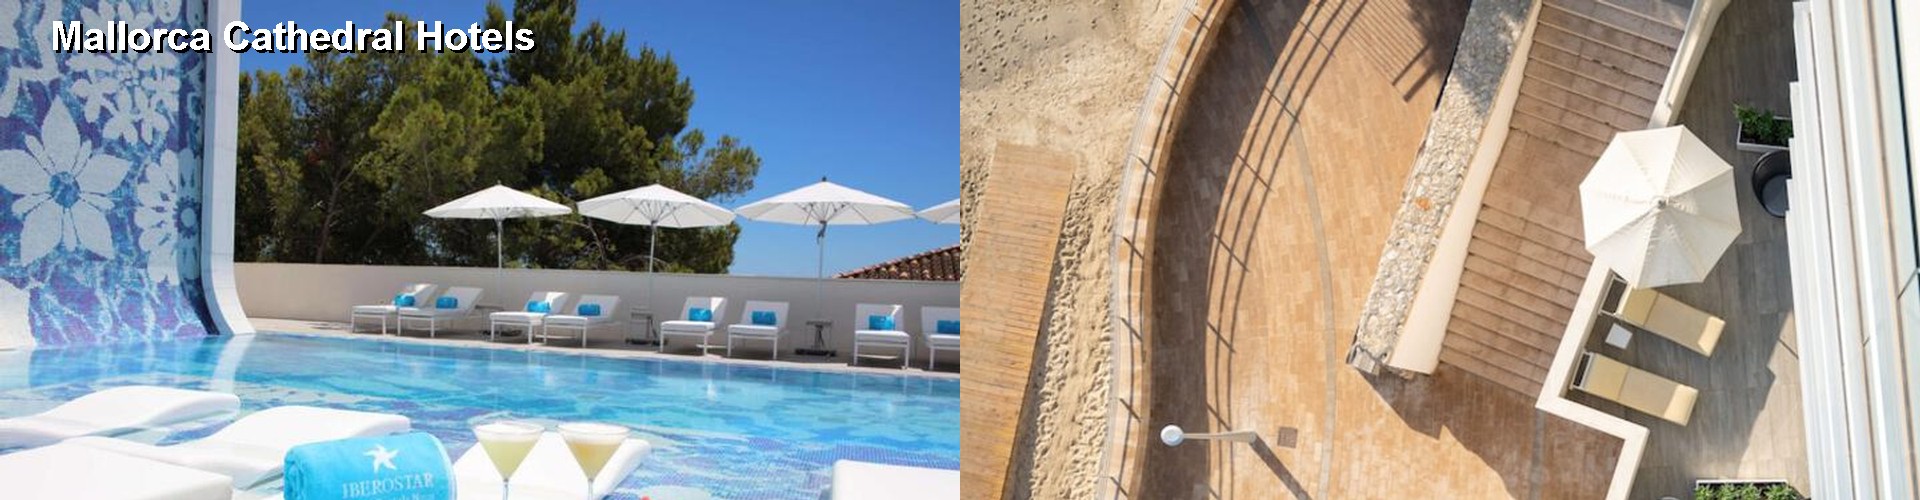 5 Best Hotels near Mallorca Cathedral